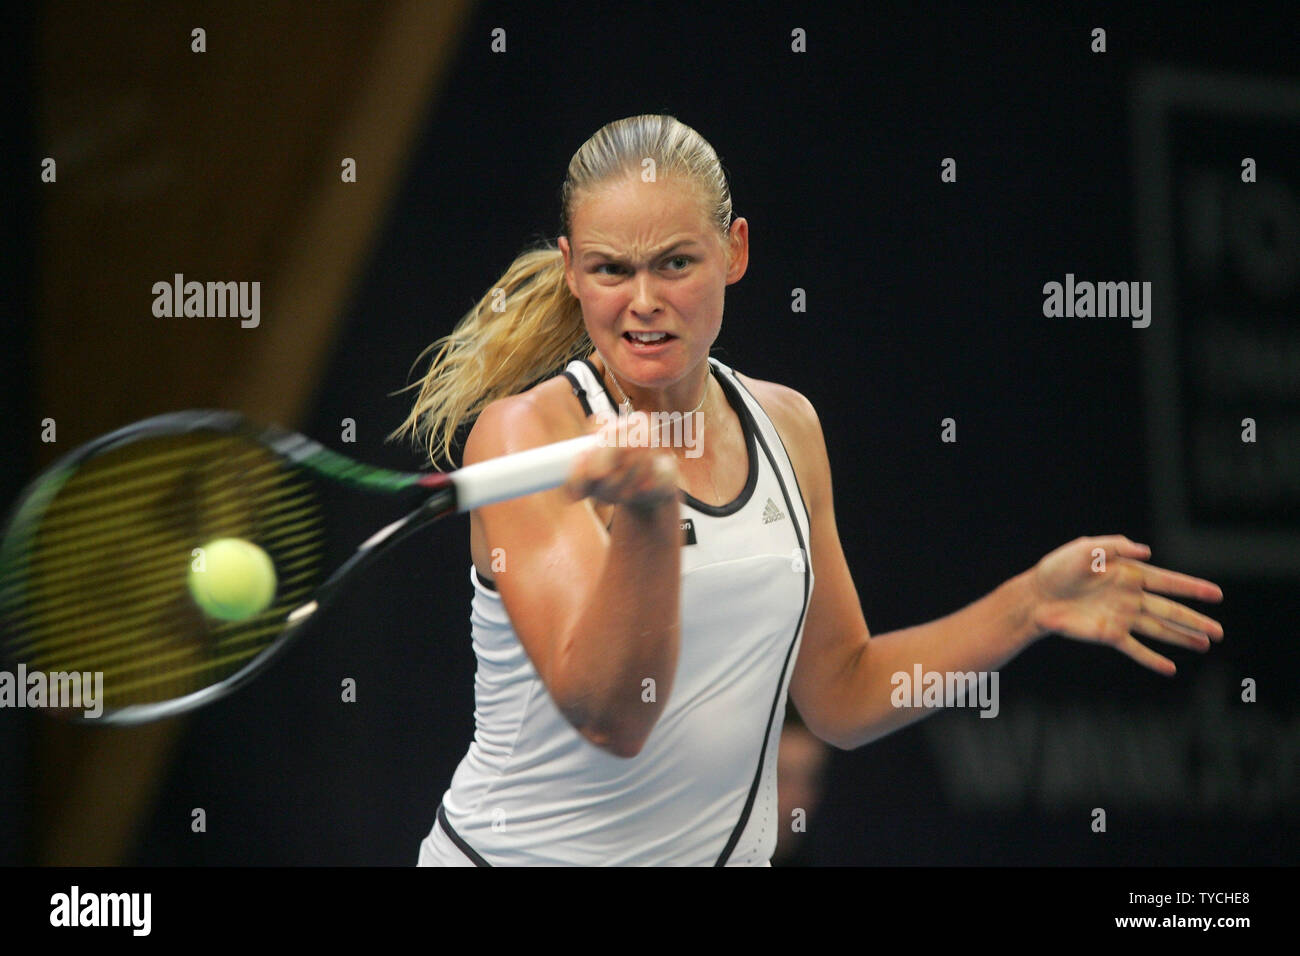 Anna-lena Groenefeld of Germany forehand returns to Kim Clijsters of Belgium.  Clijsters won singles final 6-2, 6-4 at Fortis Championships WTA women's tennis tournament ($585,000 Tier II) in Luxembourg on October 2, 2005.  (UPI Photo/Tom Theobald) Stock Photo